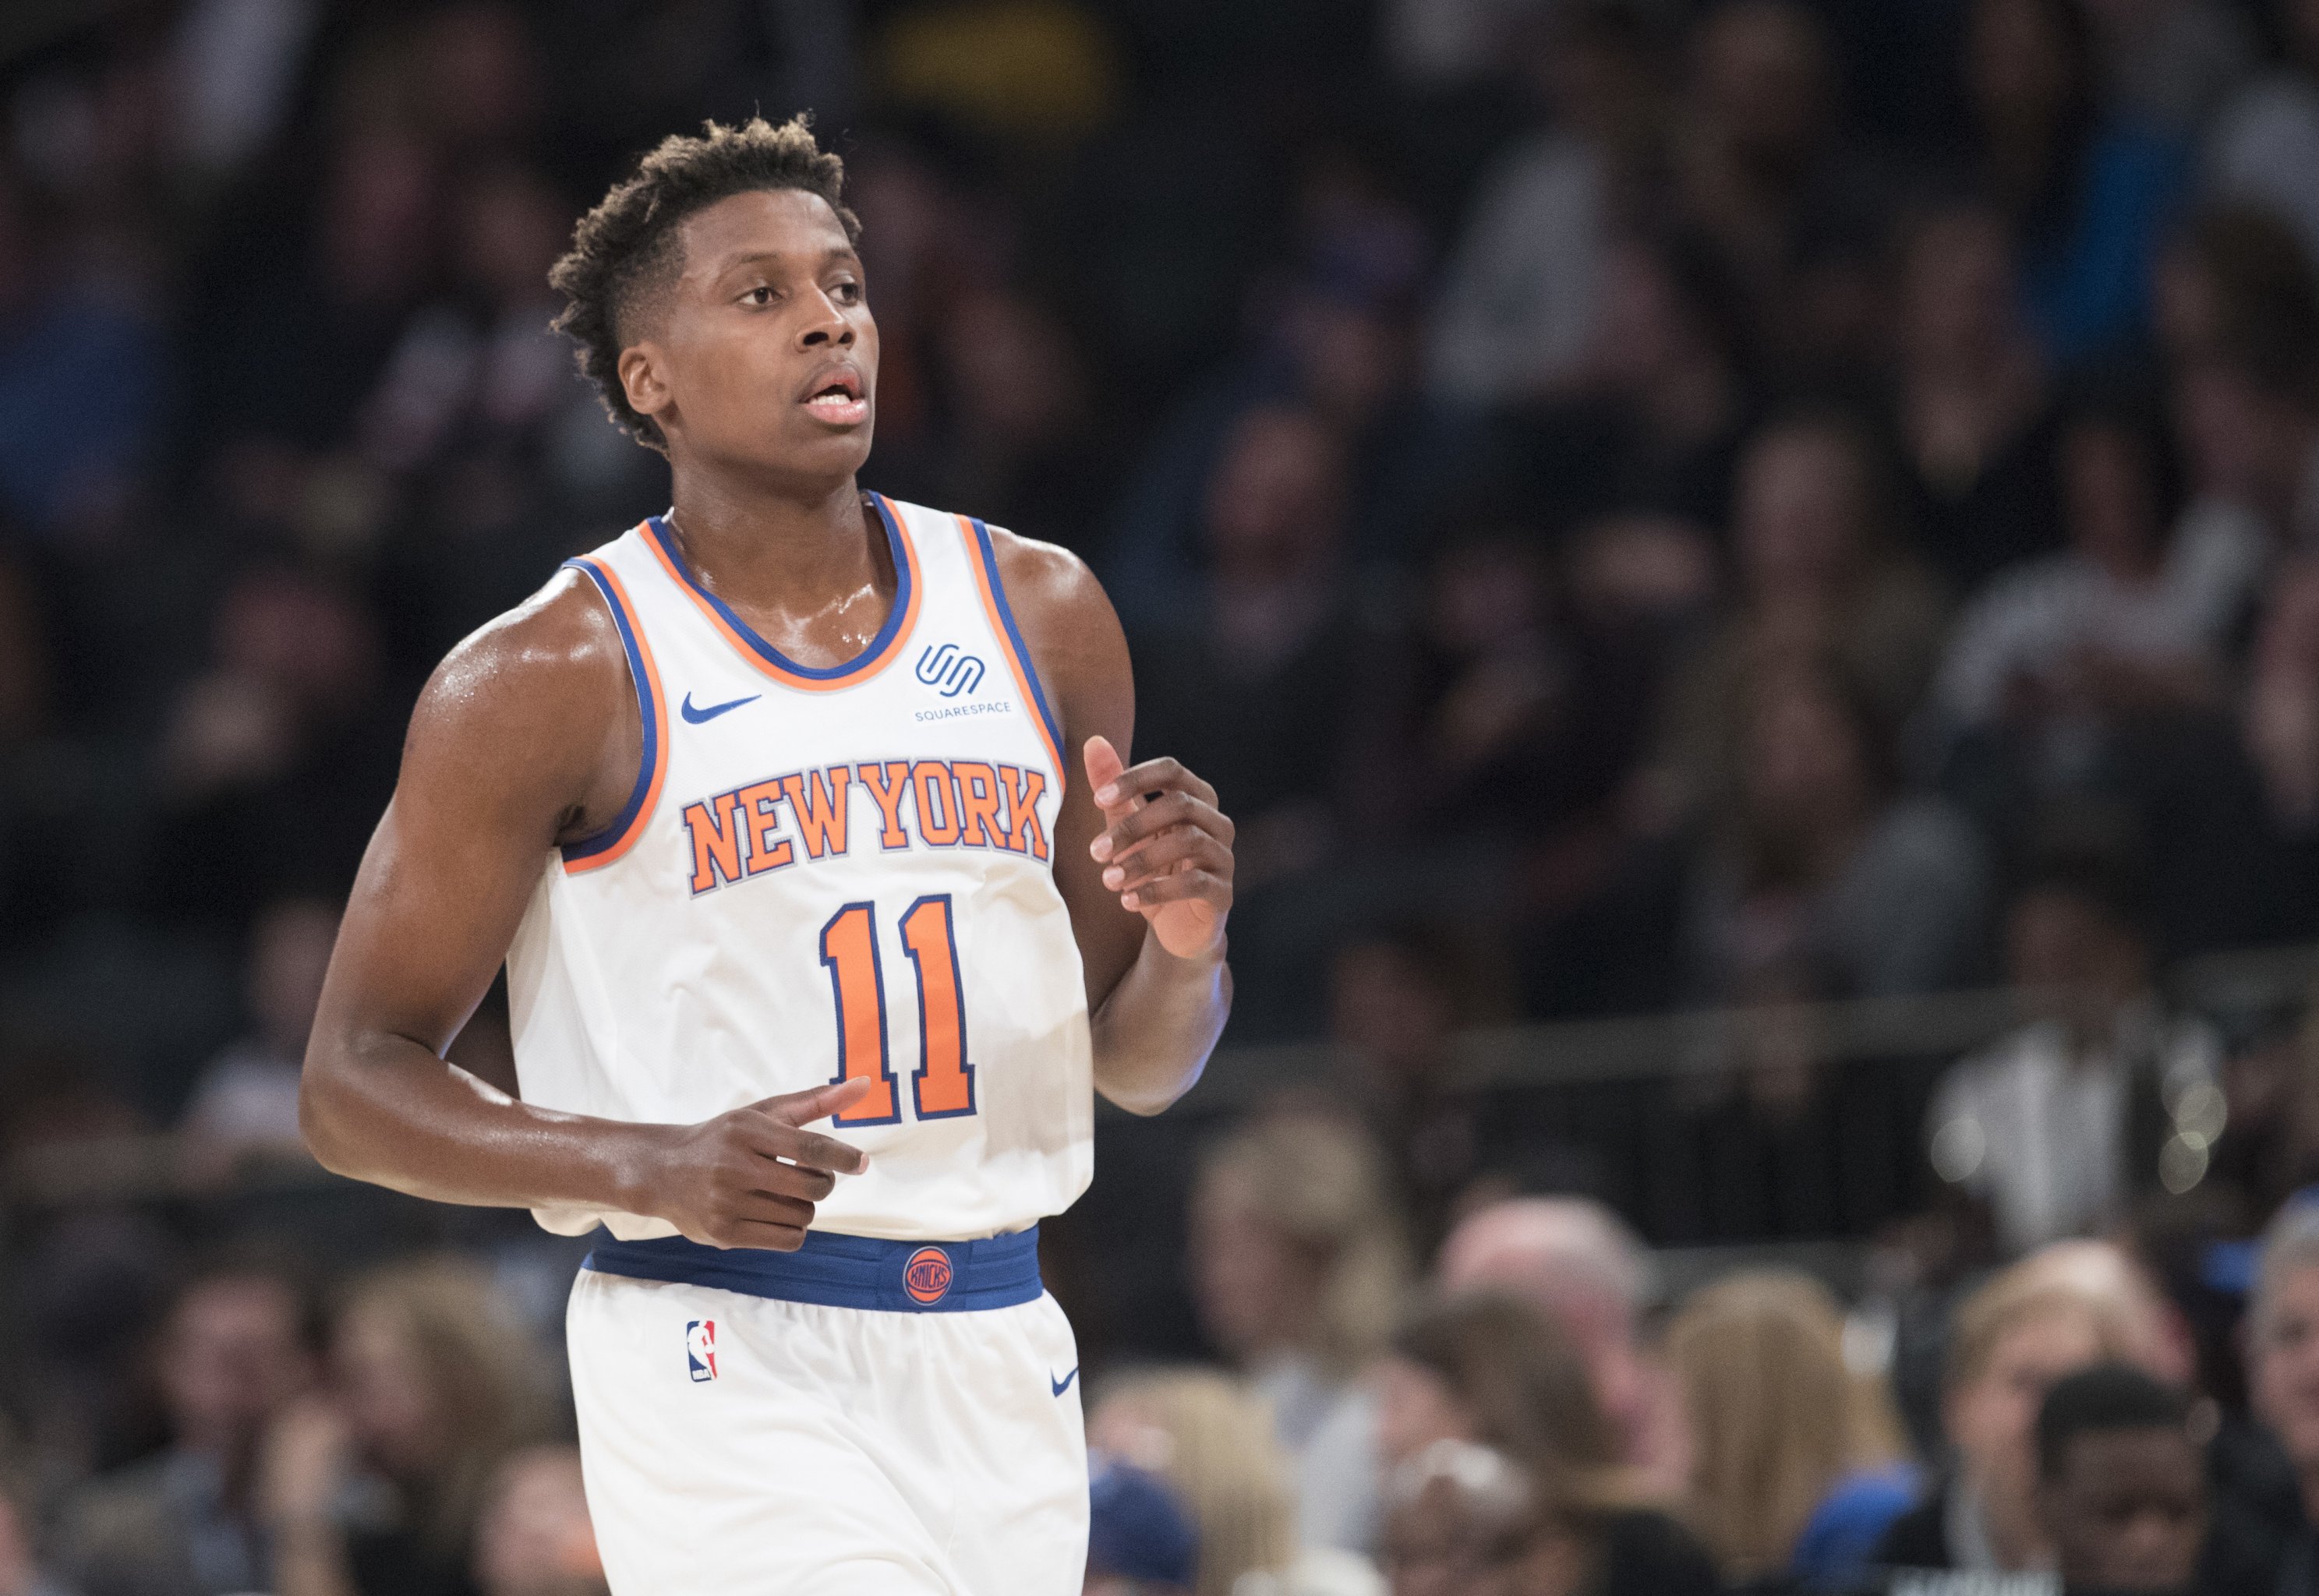 New York Knicks have their long-awaited point guard in Dennis Smith Jr